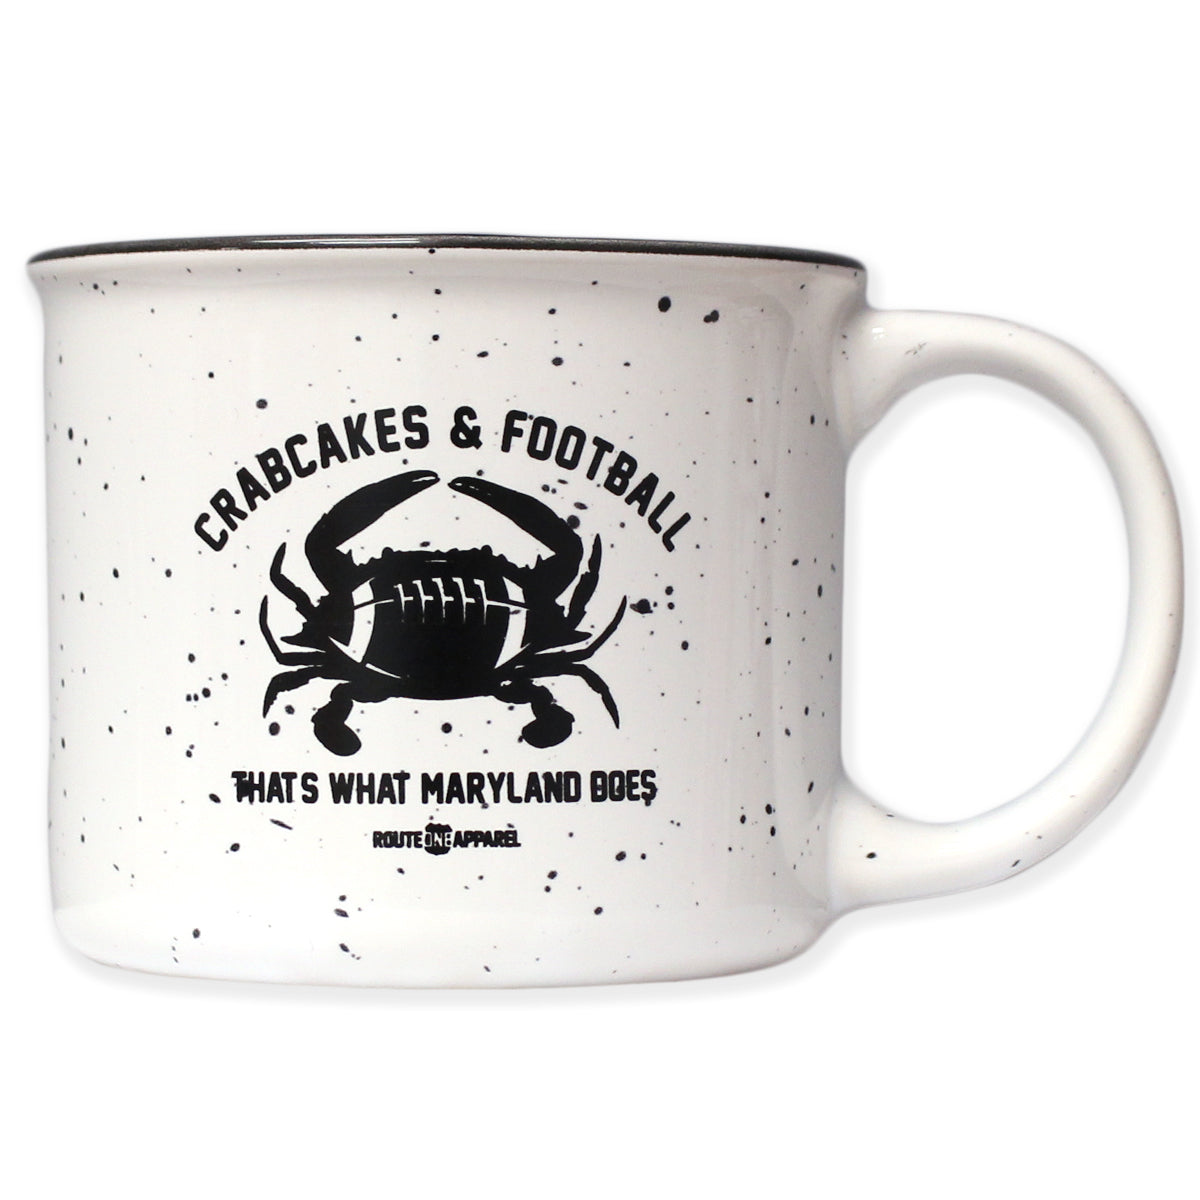 Crabcakes & Football / Mug - Route One Apparel